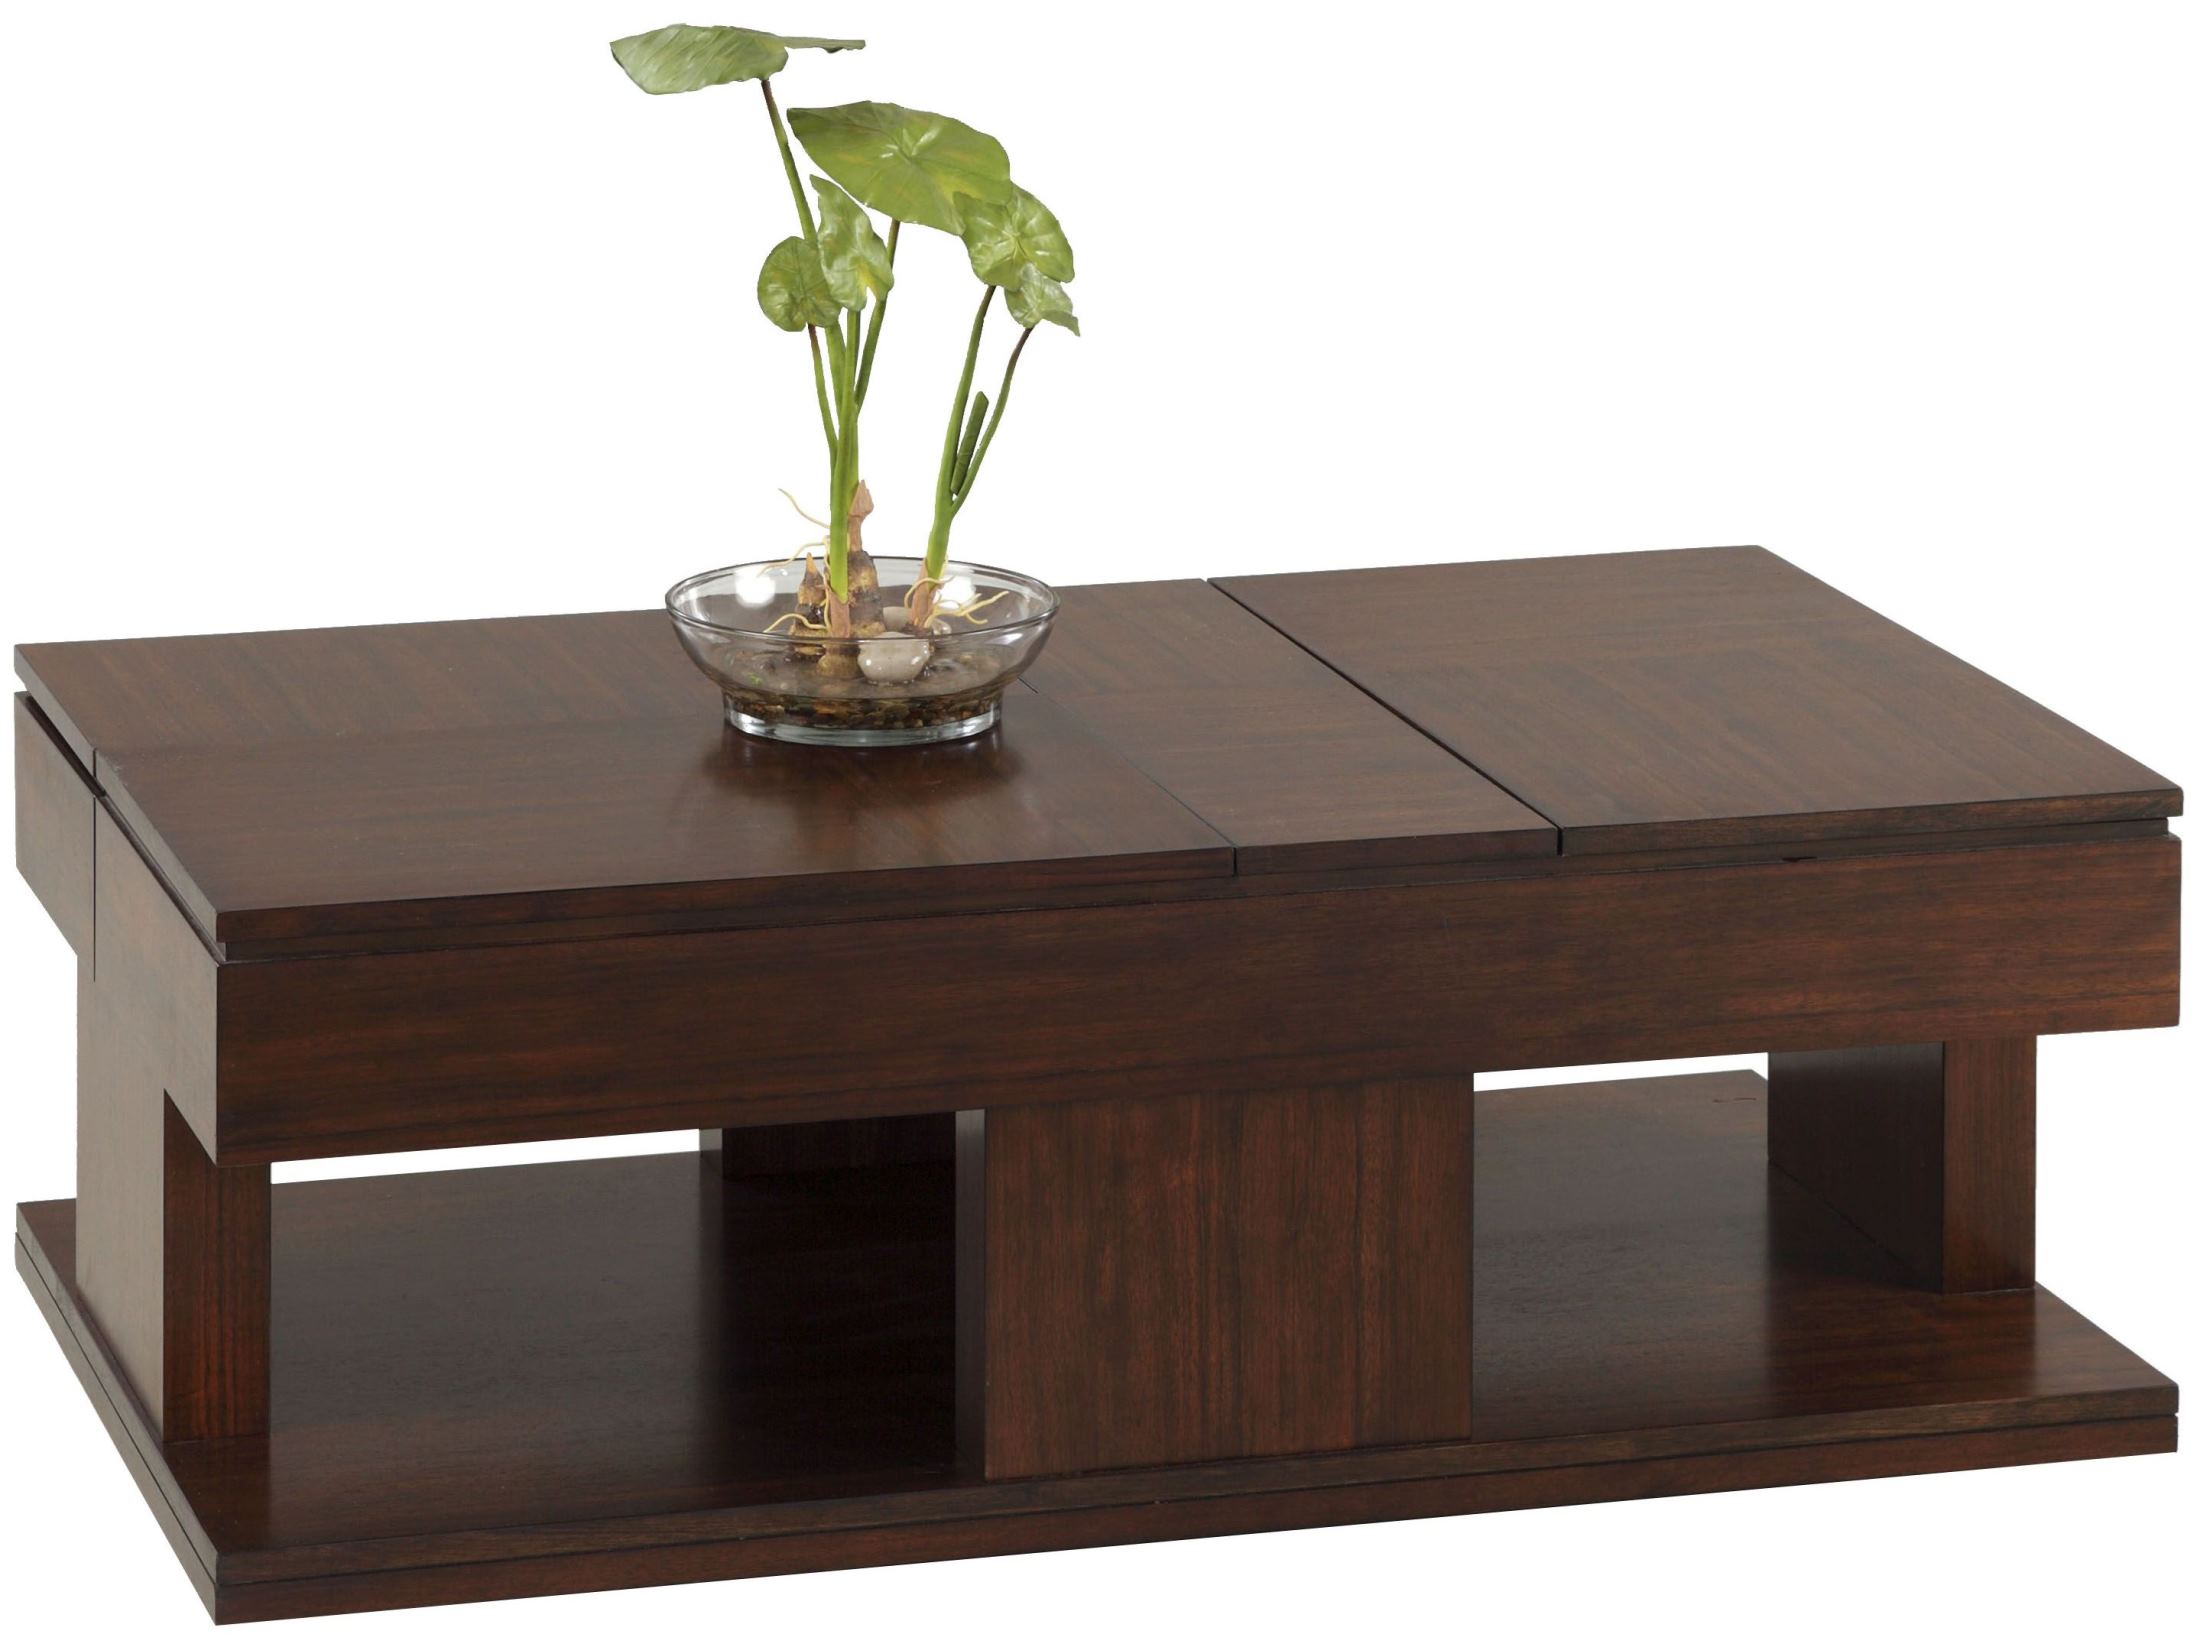 Le Mans Collection Contemporary Mozambique Veneer Cocktail Table with Double Lift